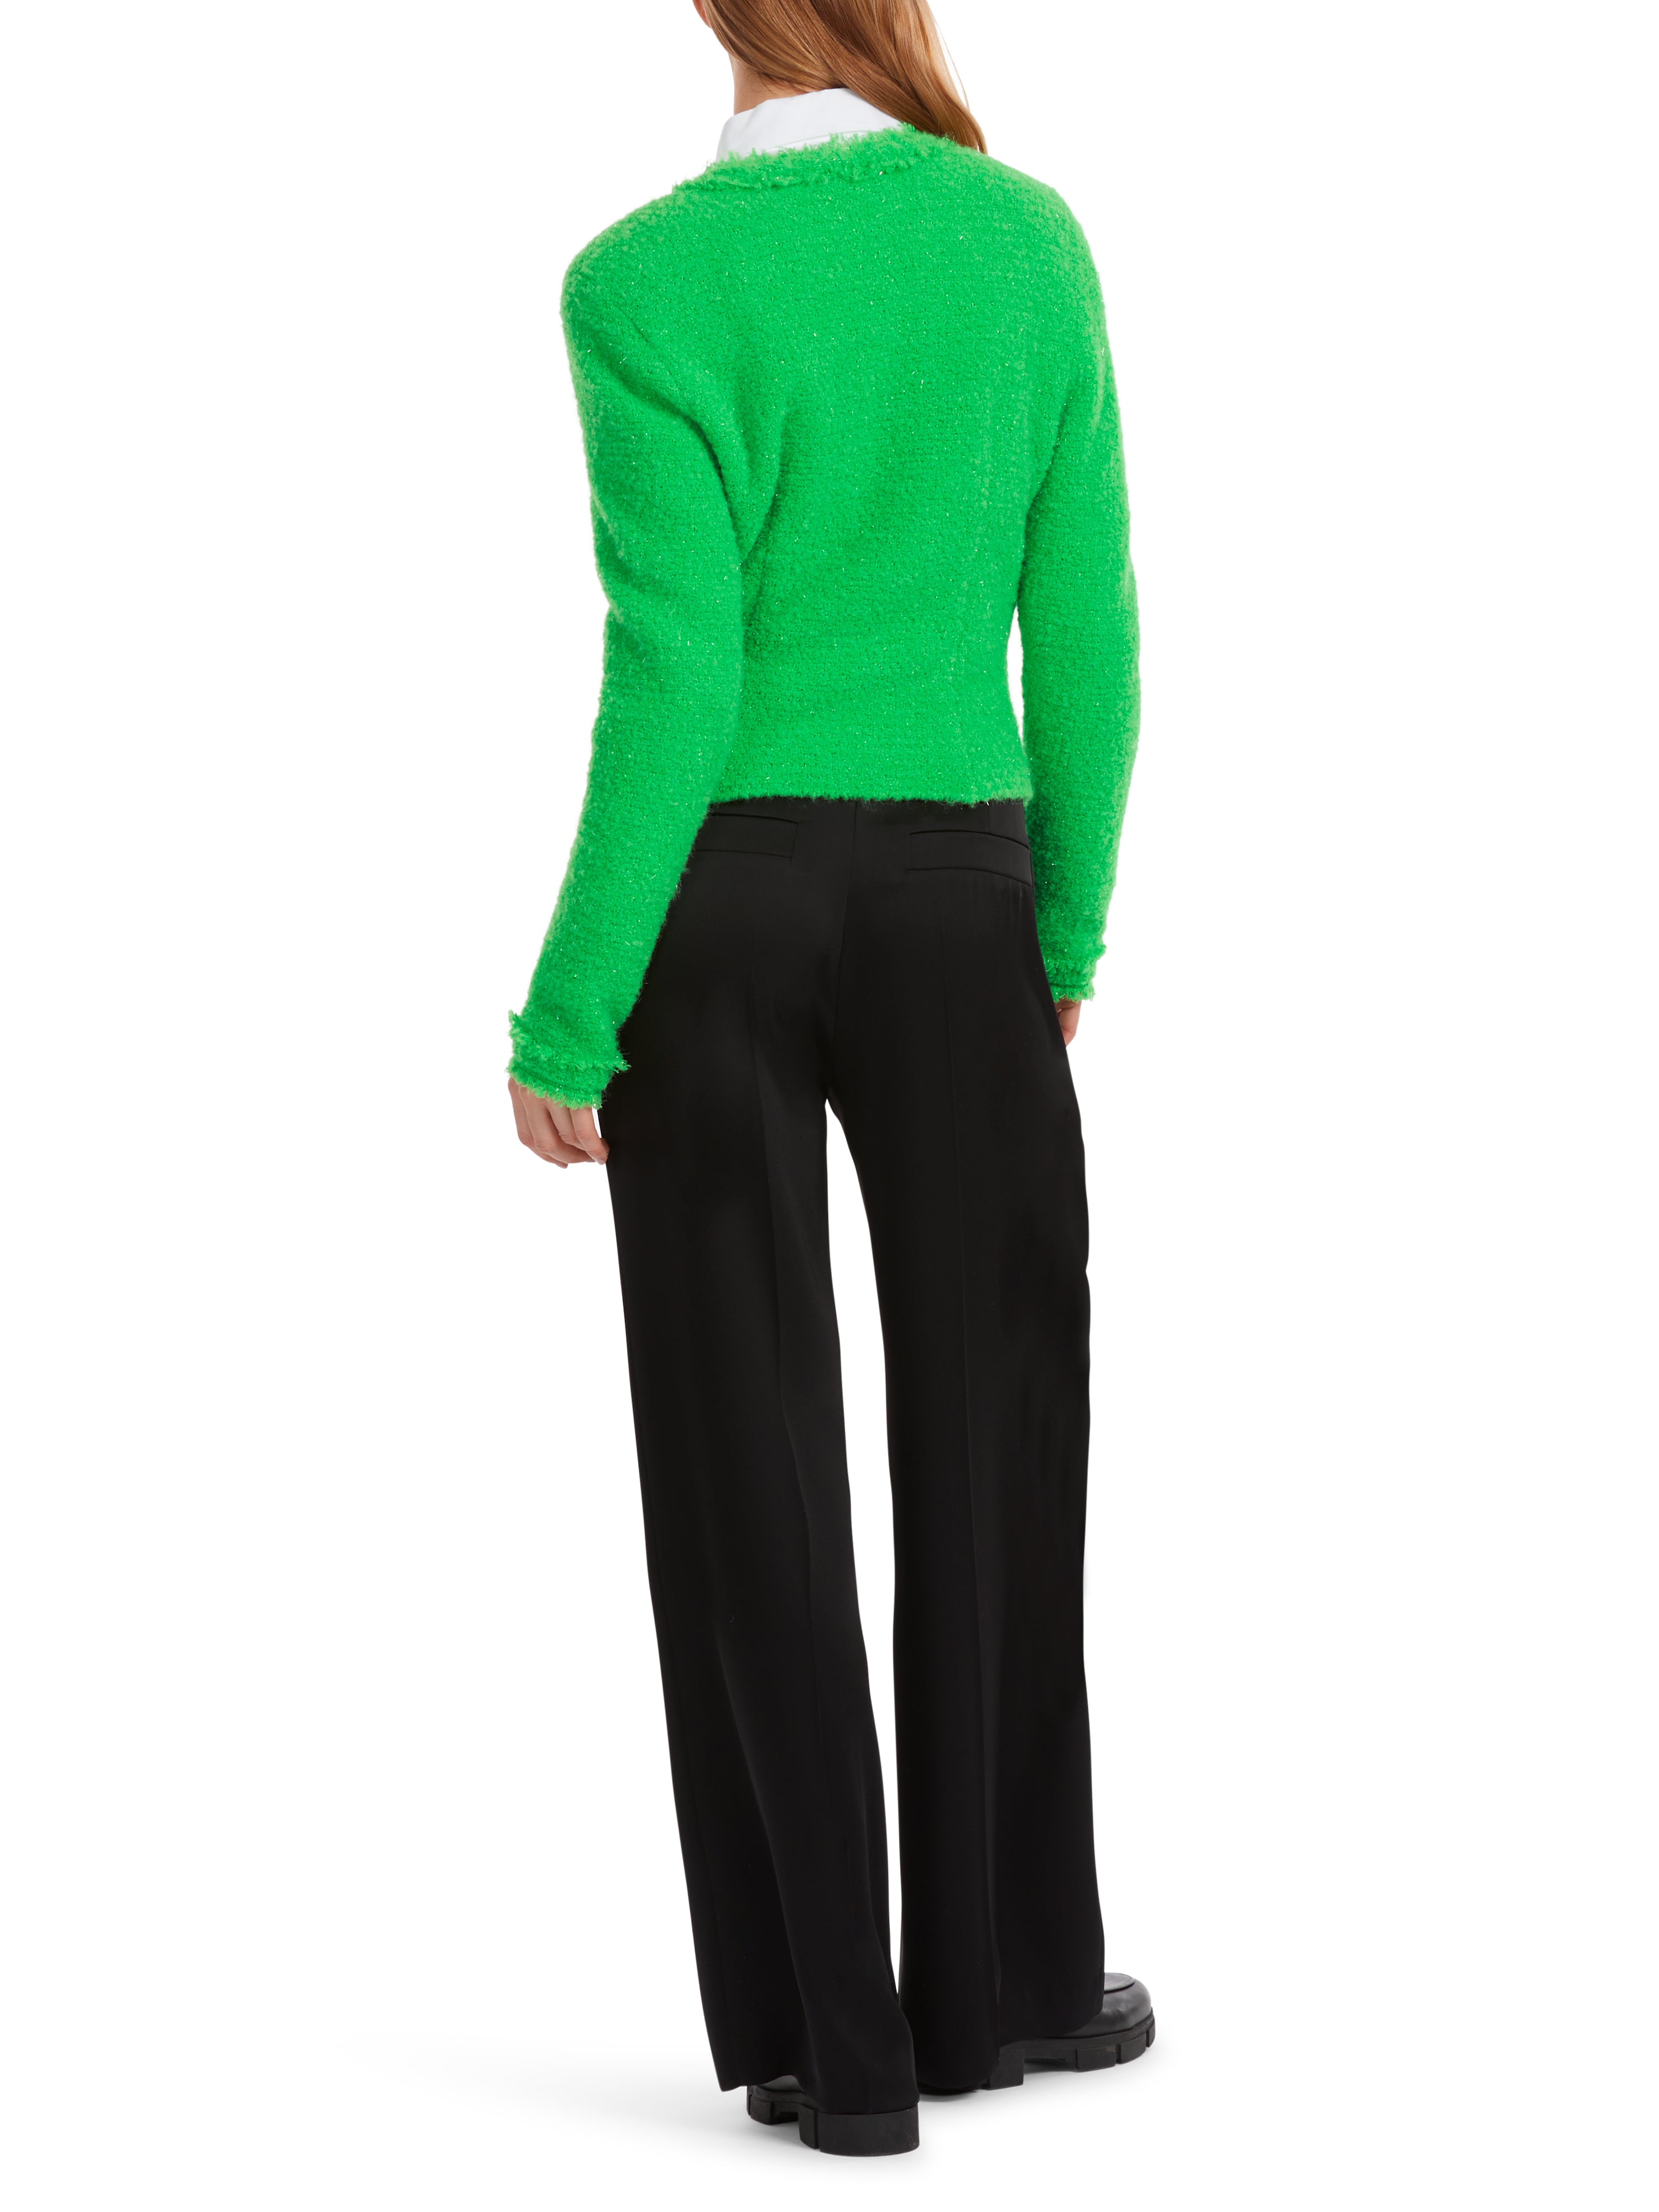 Marc Cain Cardigan in Bright Green